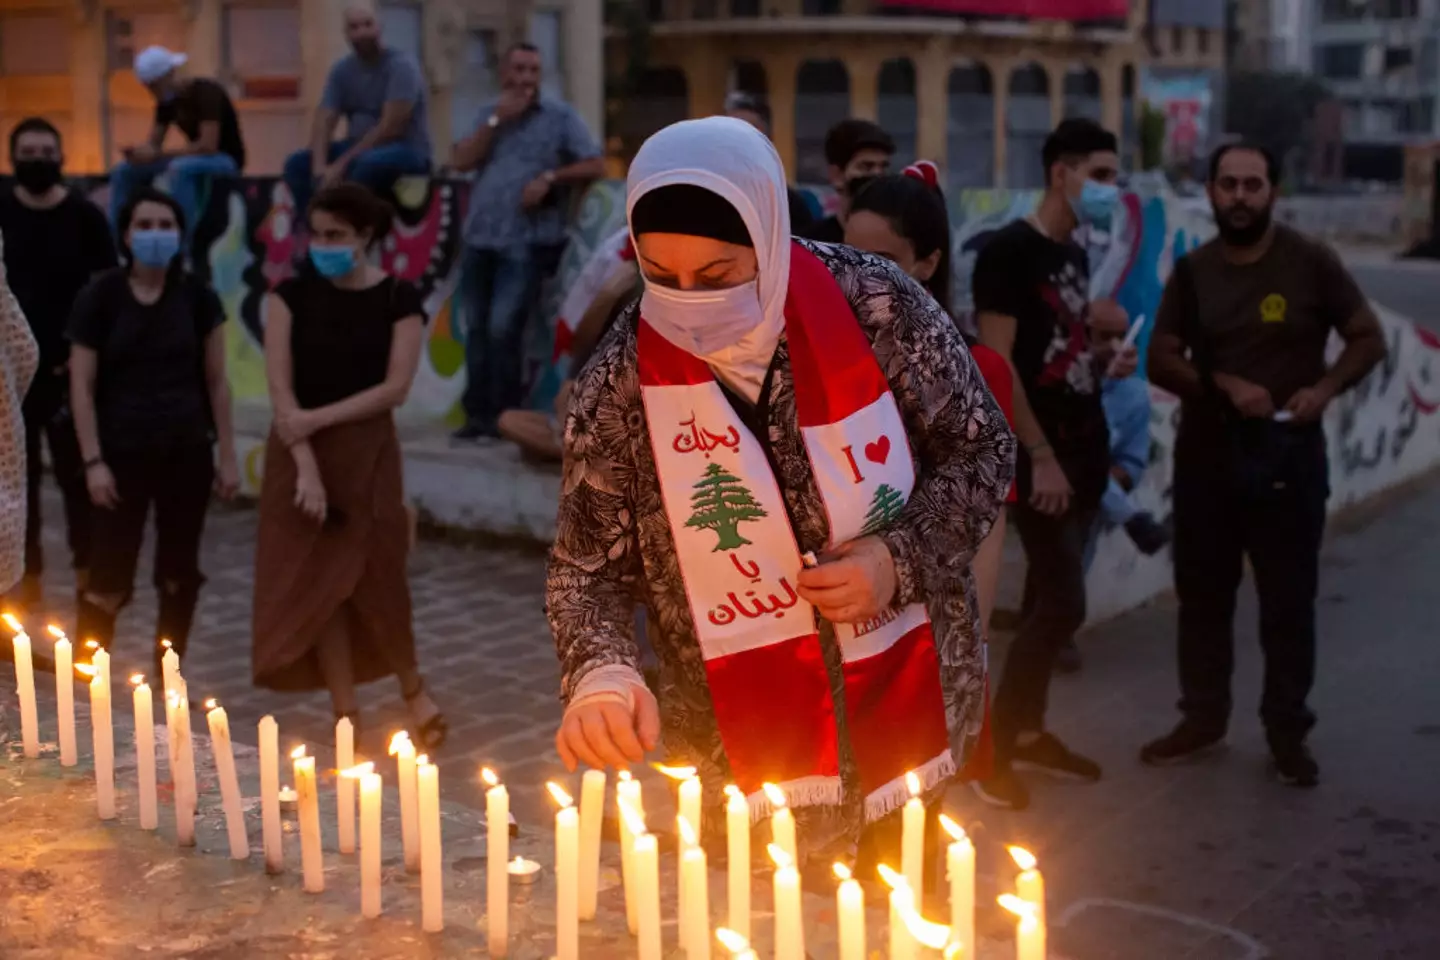 A vigil marks one month since the explosion. (Sam Tarling/Getty Images)